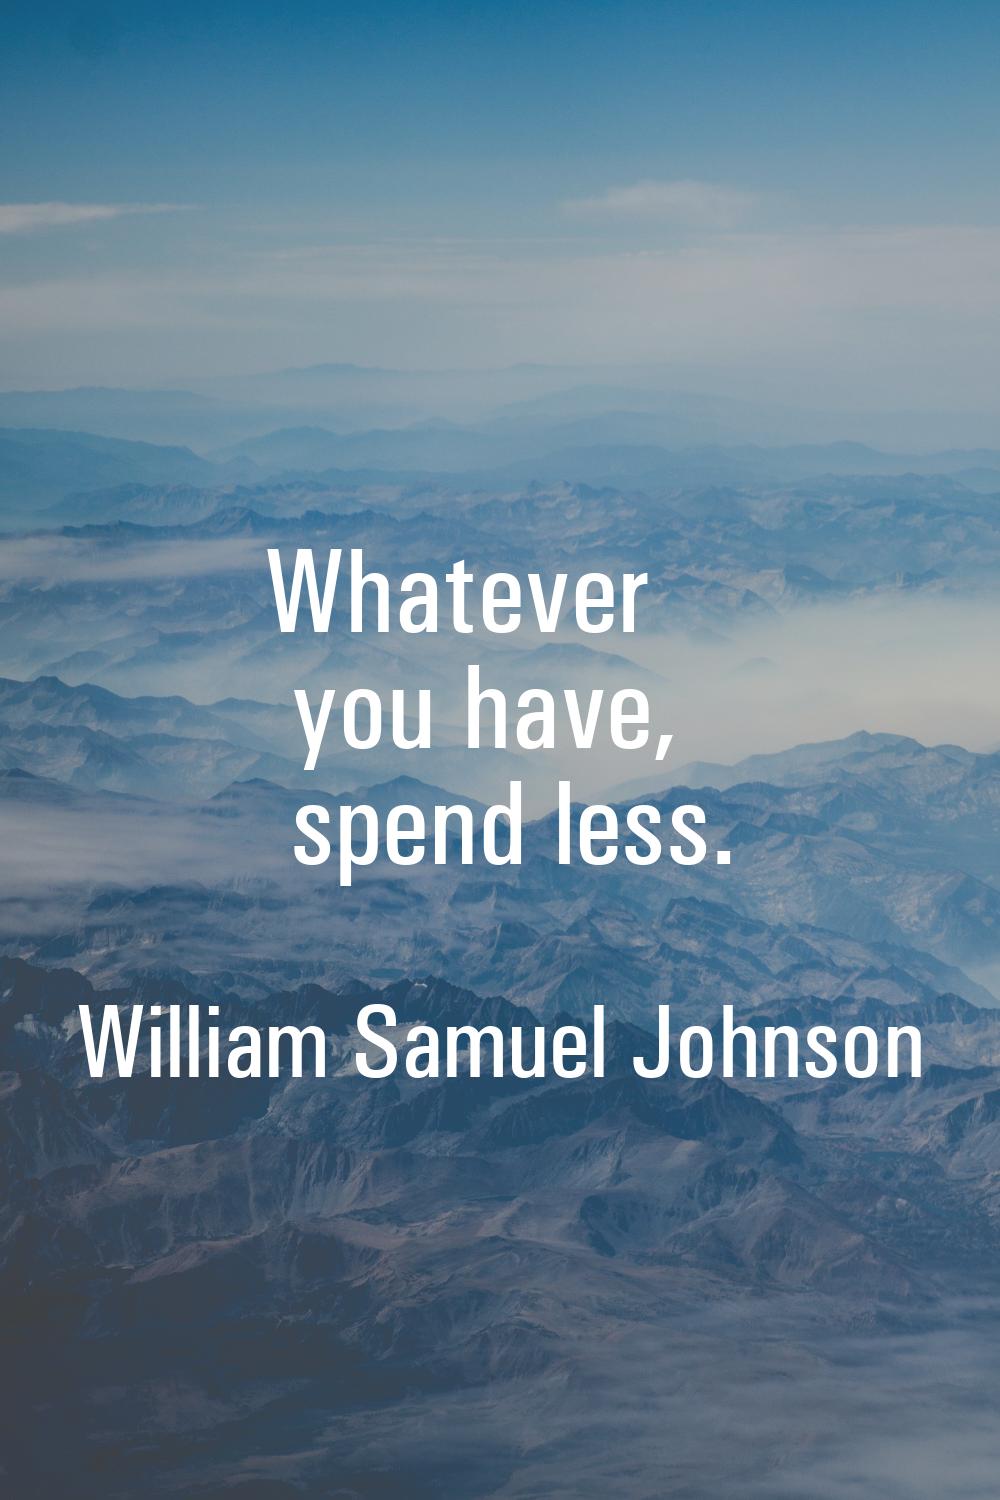 Whatever you have, spend less.